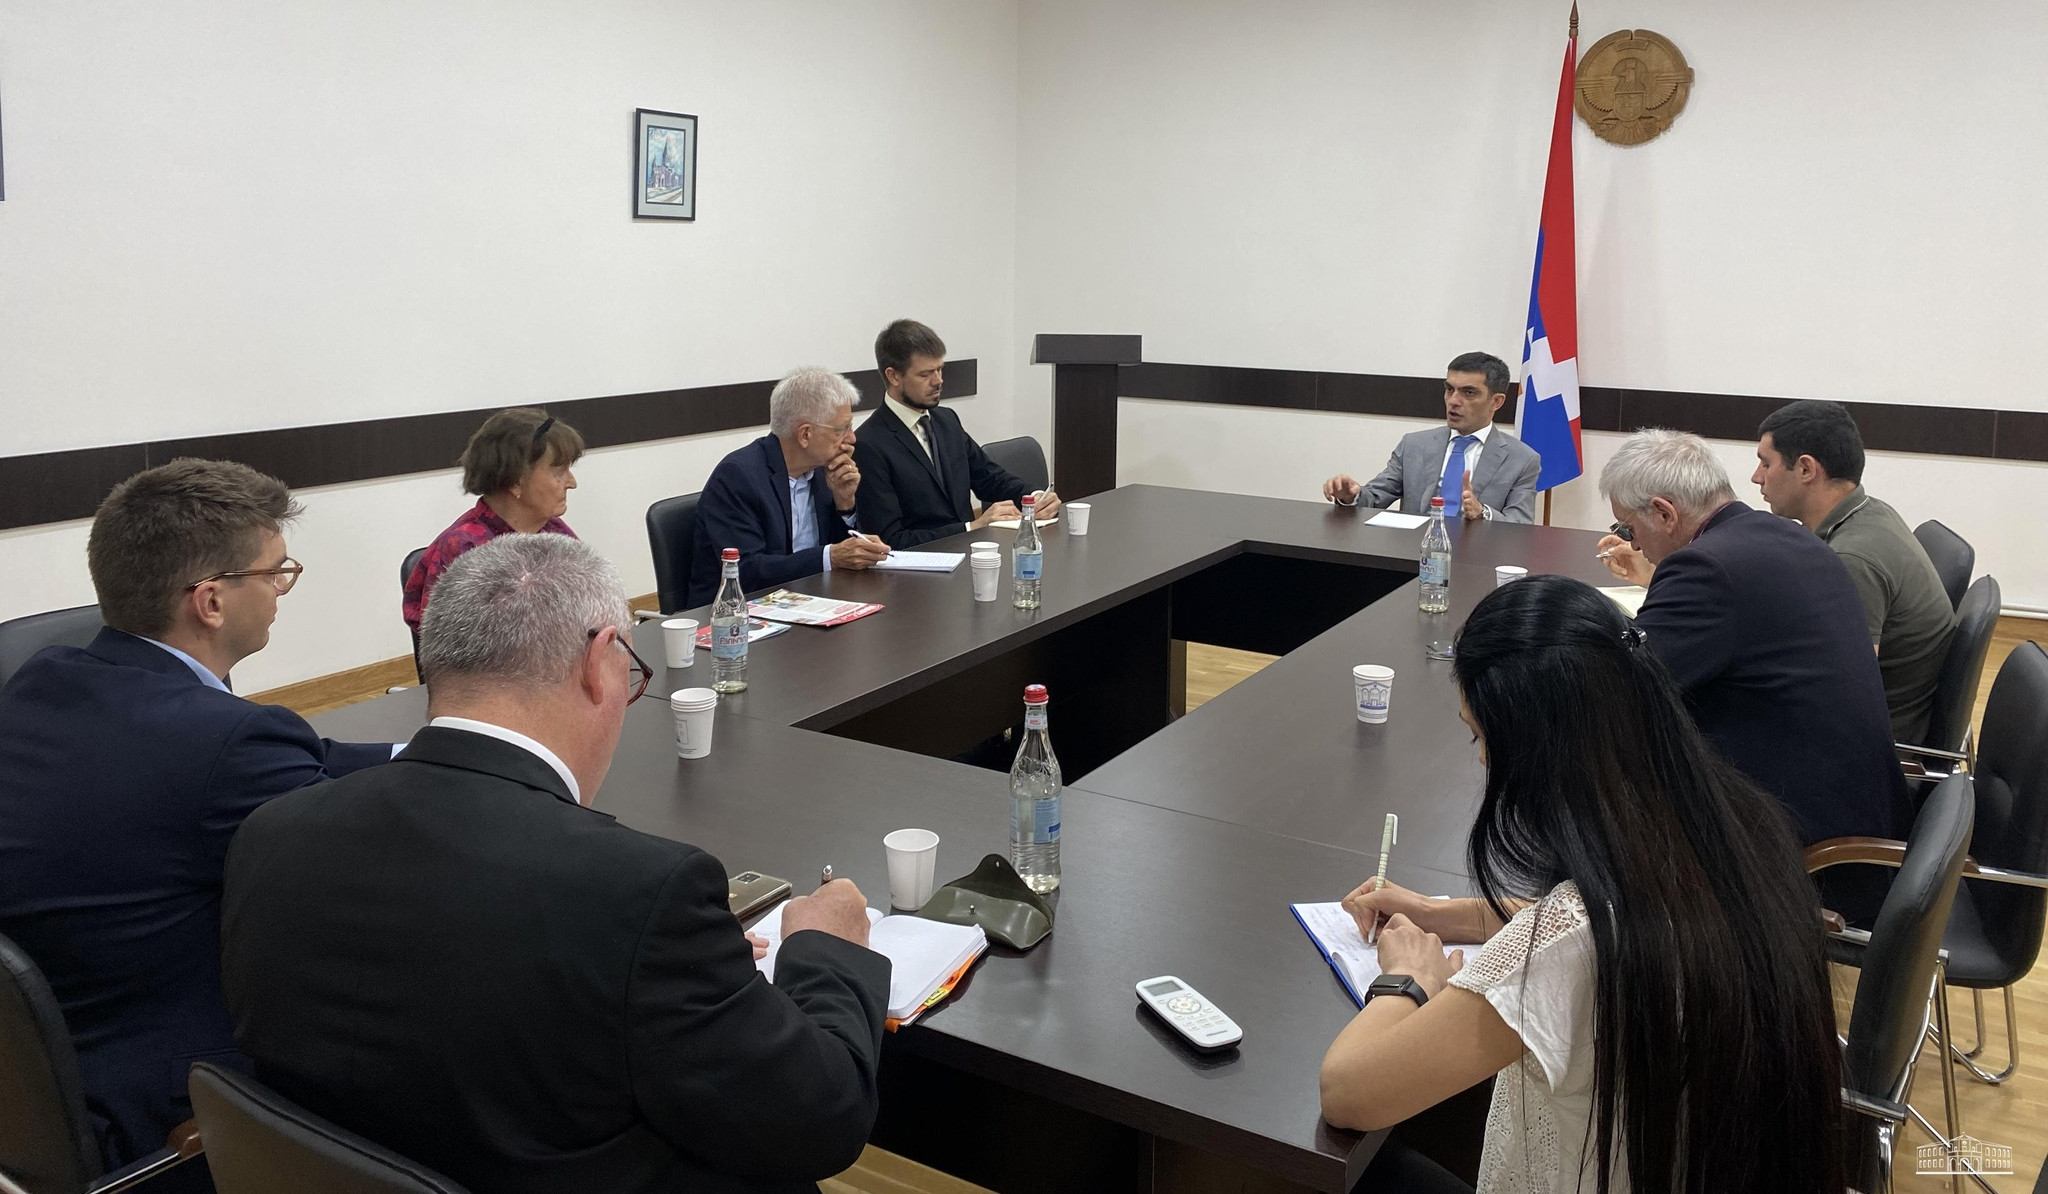 Nagorno-Karabakh Foreign Minister discussed issues related to humanitarian disaster caused by siege of Nagorno-Karabakh with Caroline Cox